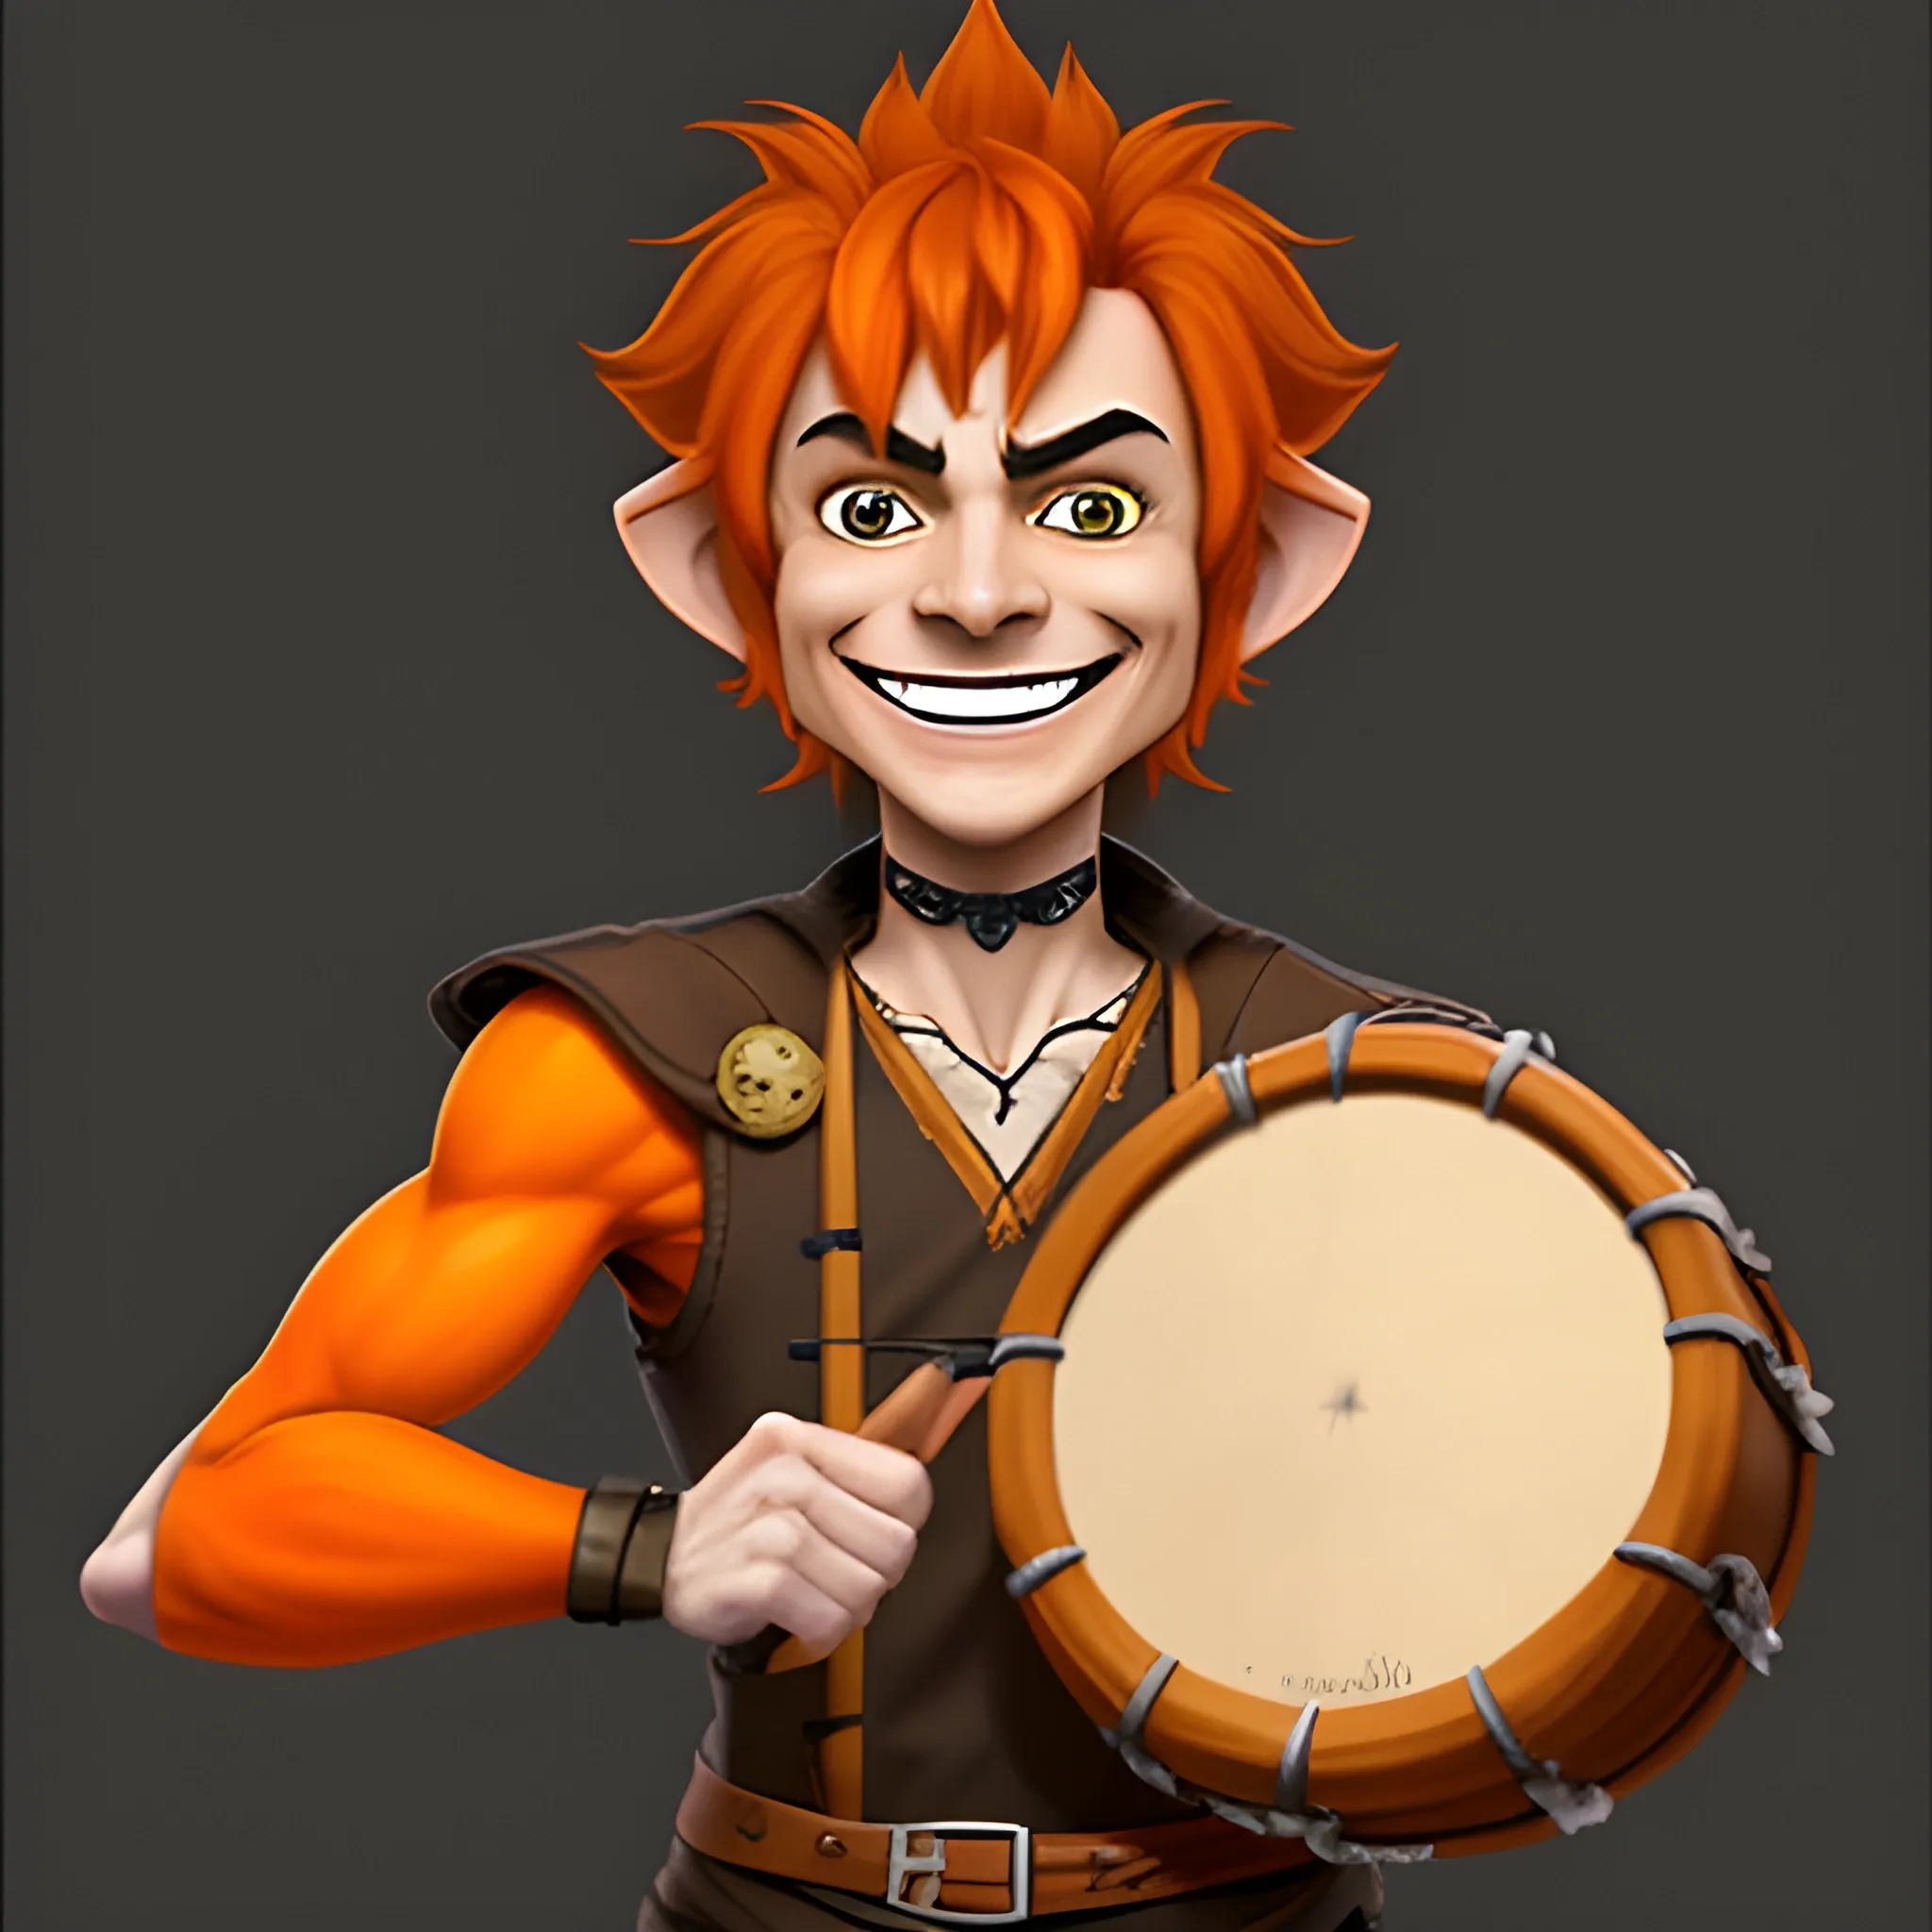 DnD  thin skinny baby face young halfling male short haired dark orange ginger with smiling with a mugshot expression and playing a drum